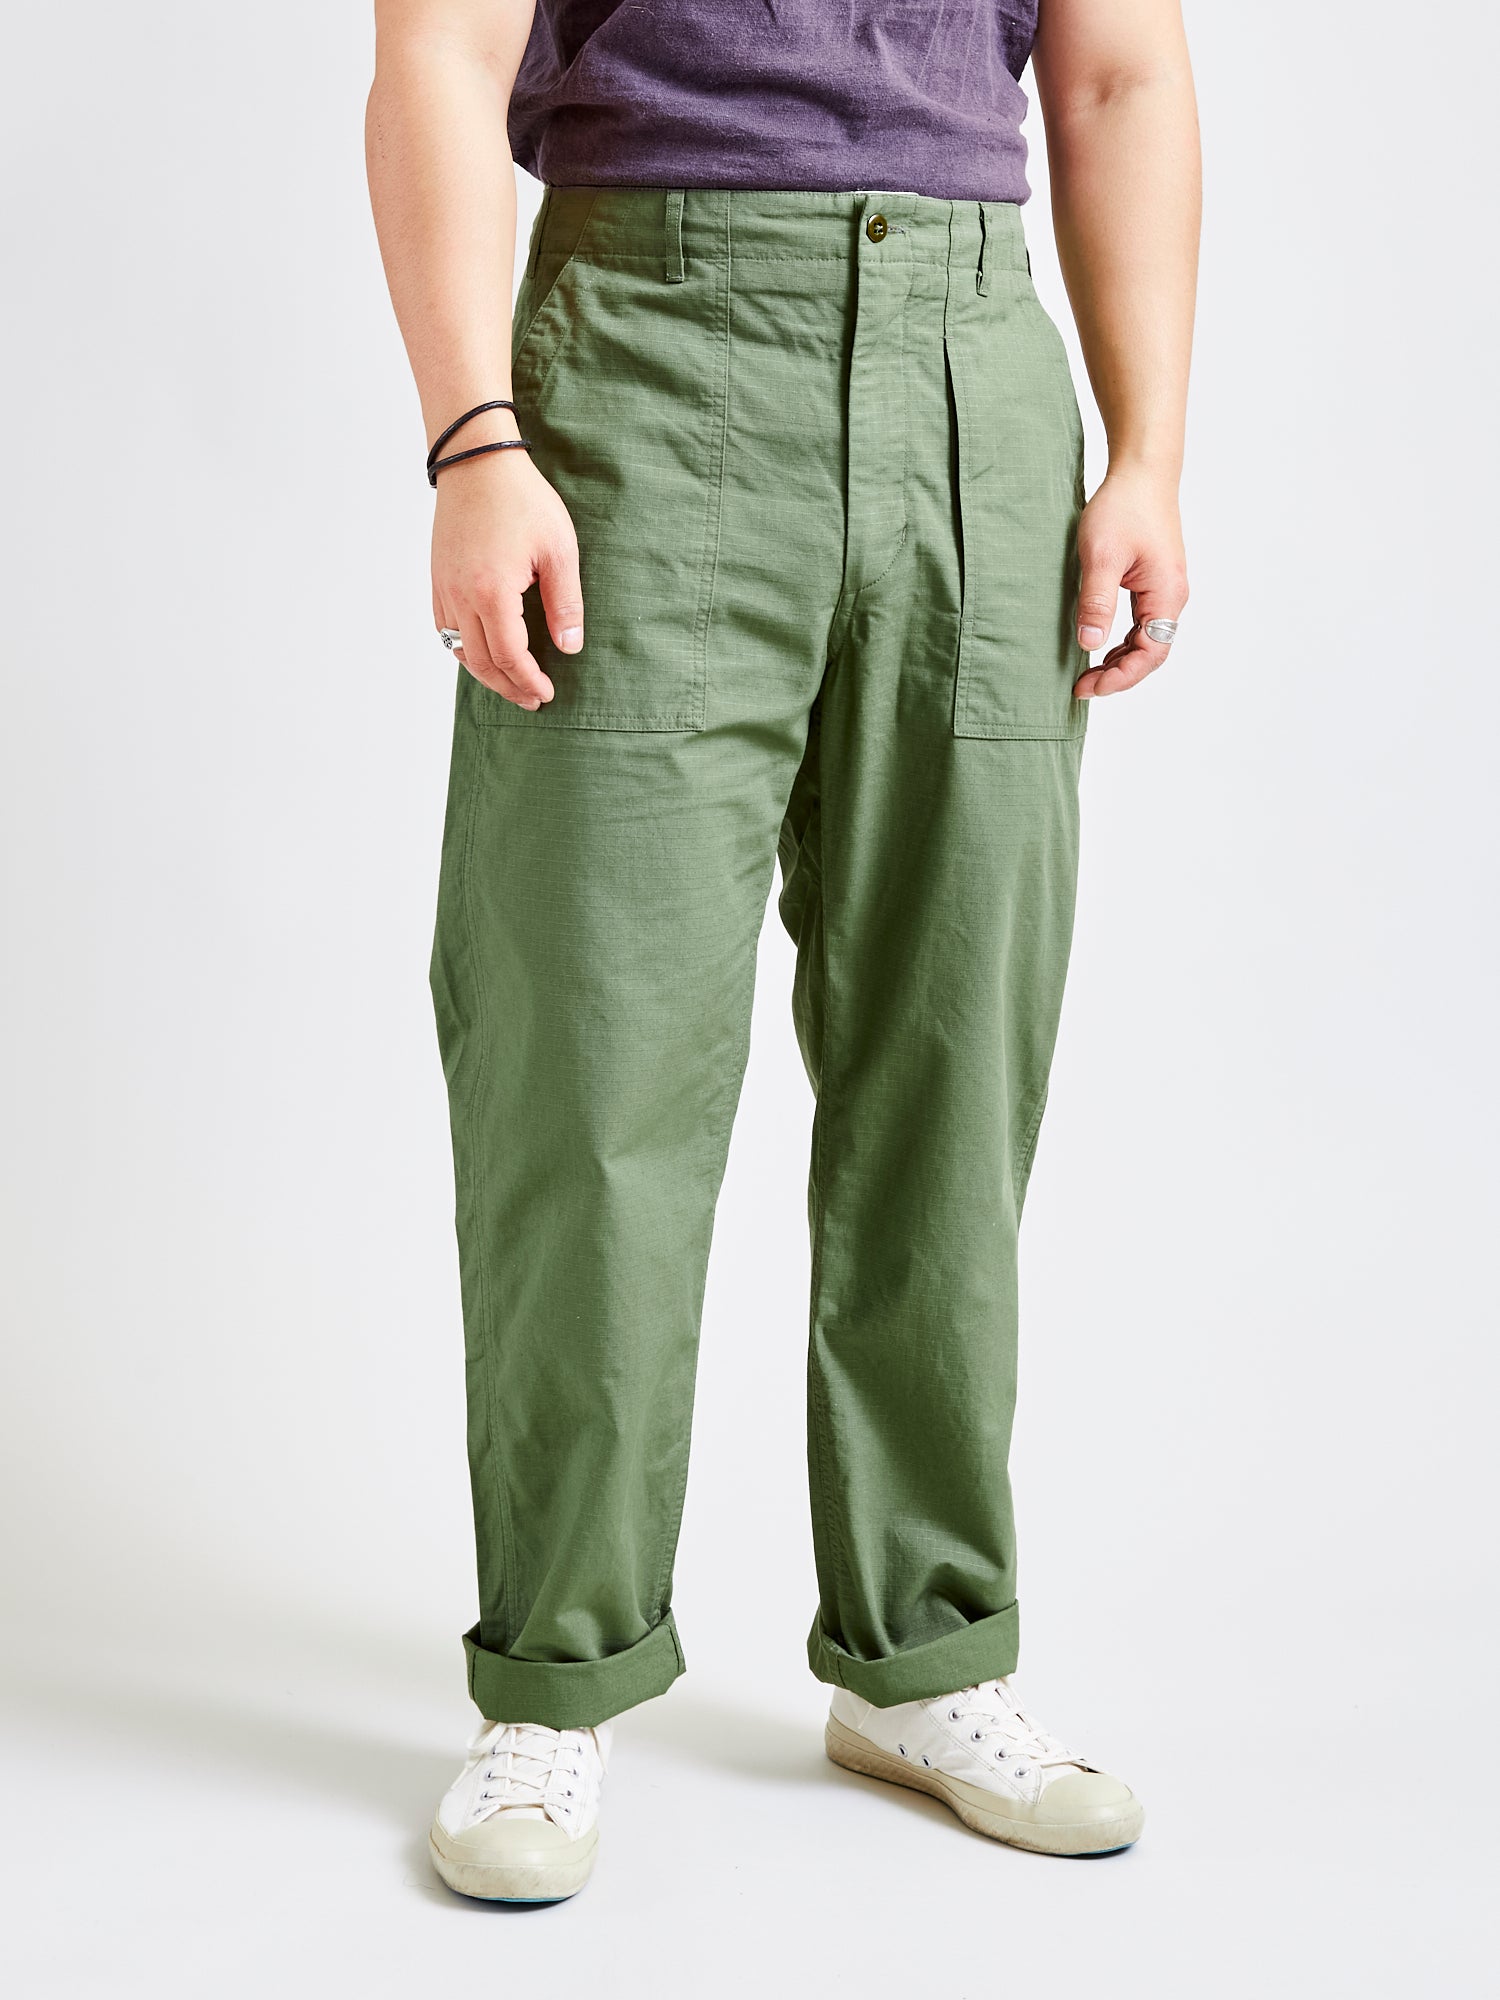 Engineered Garments Fatigue Pants in Olive Cotton Ripstop Small